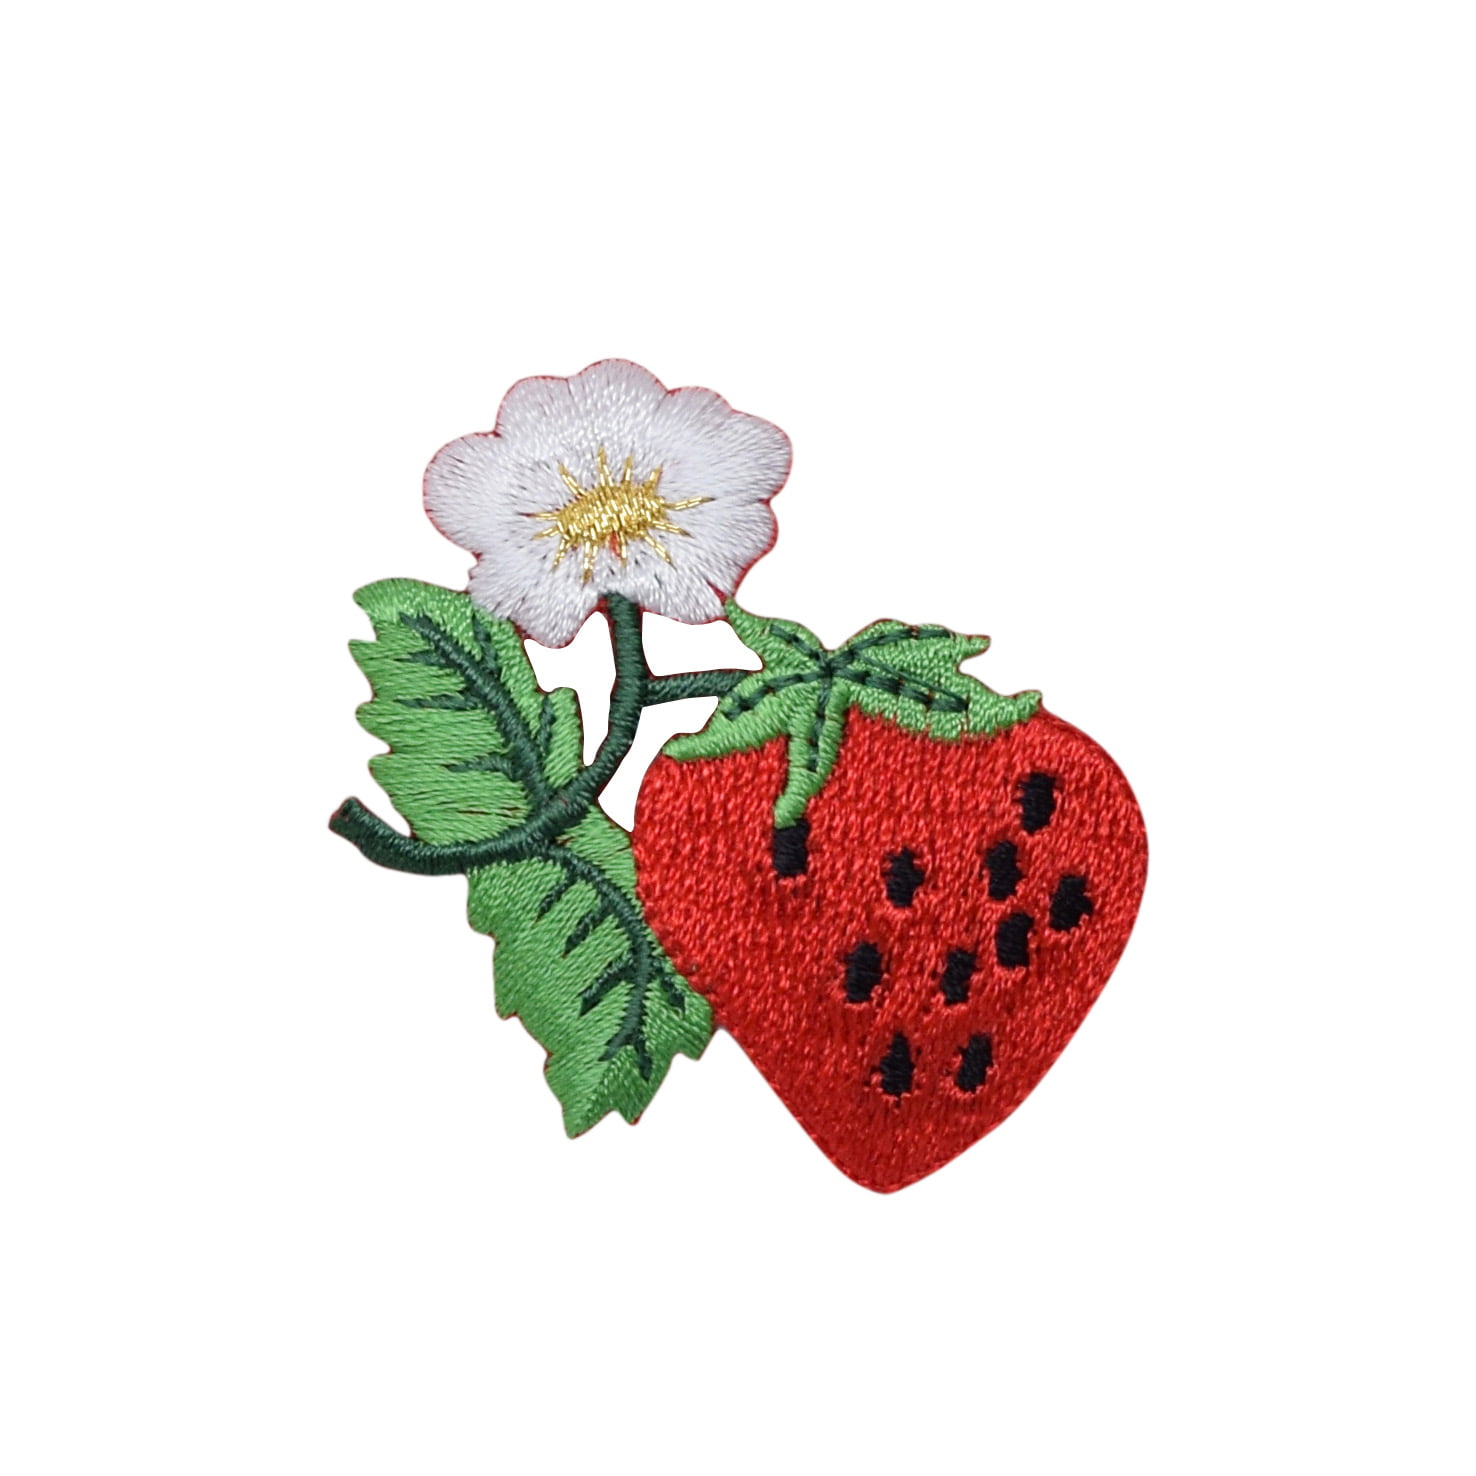 White Blossoms Strawberry Fruit/Food Iron on Applique/Embroidered Patch Two Strawberries 